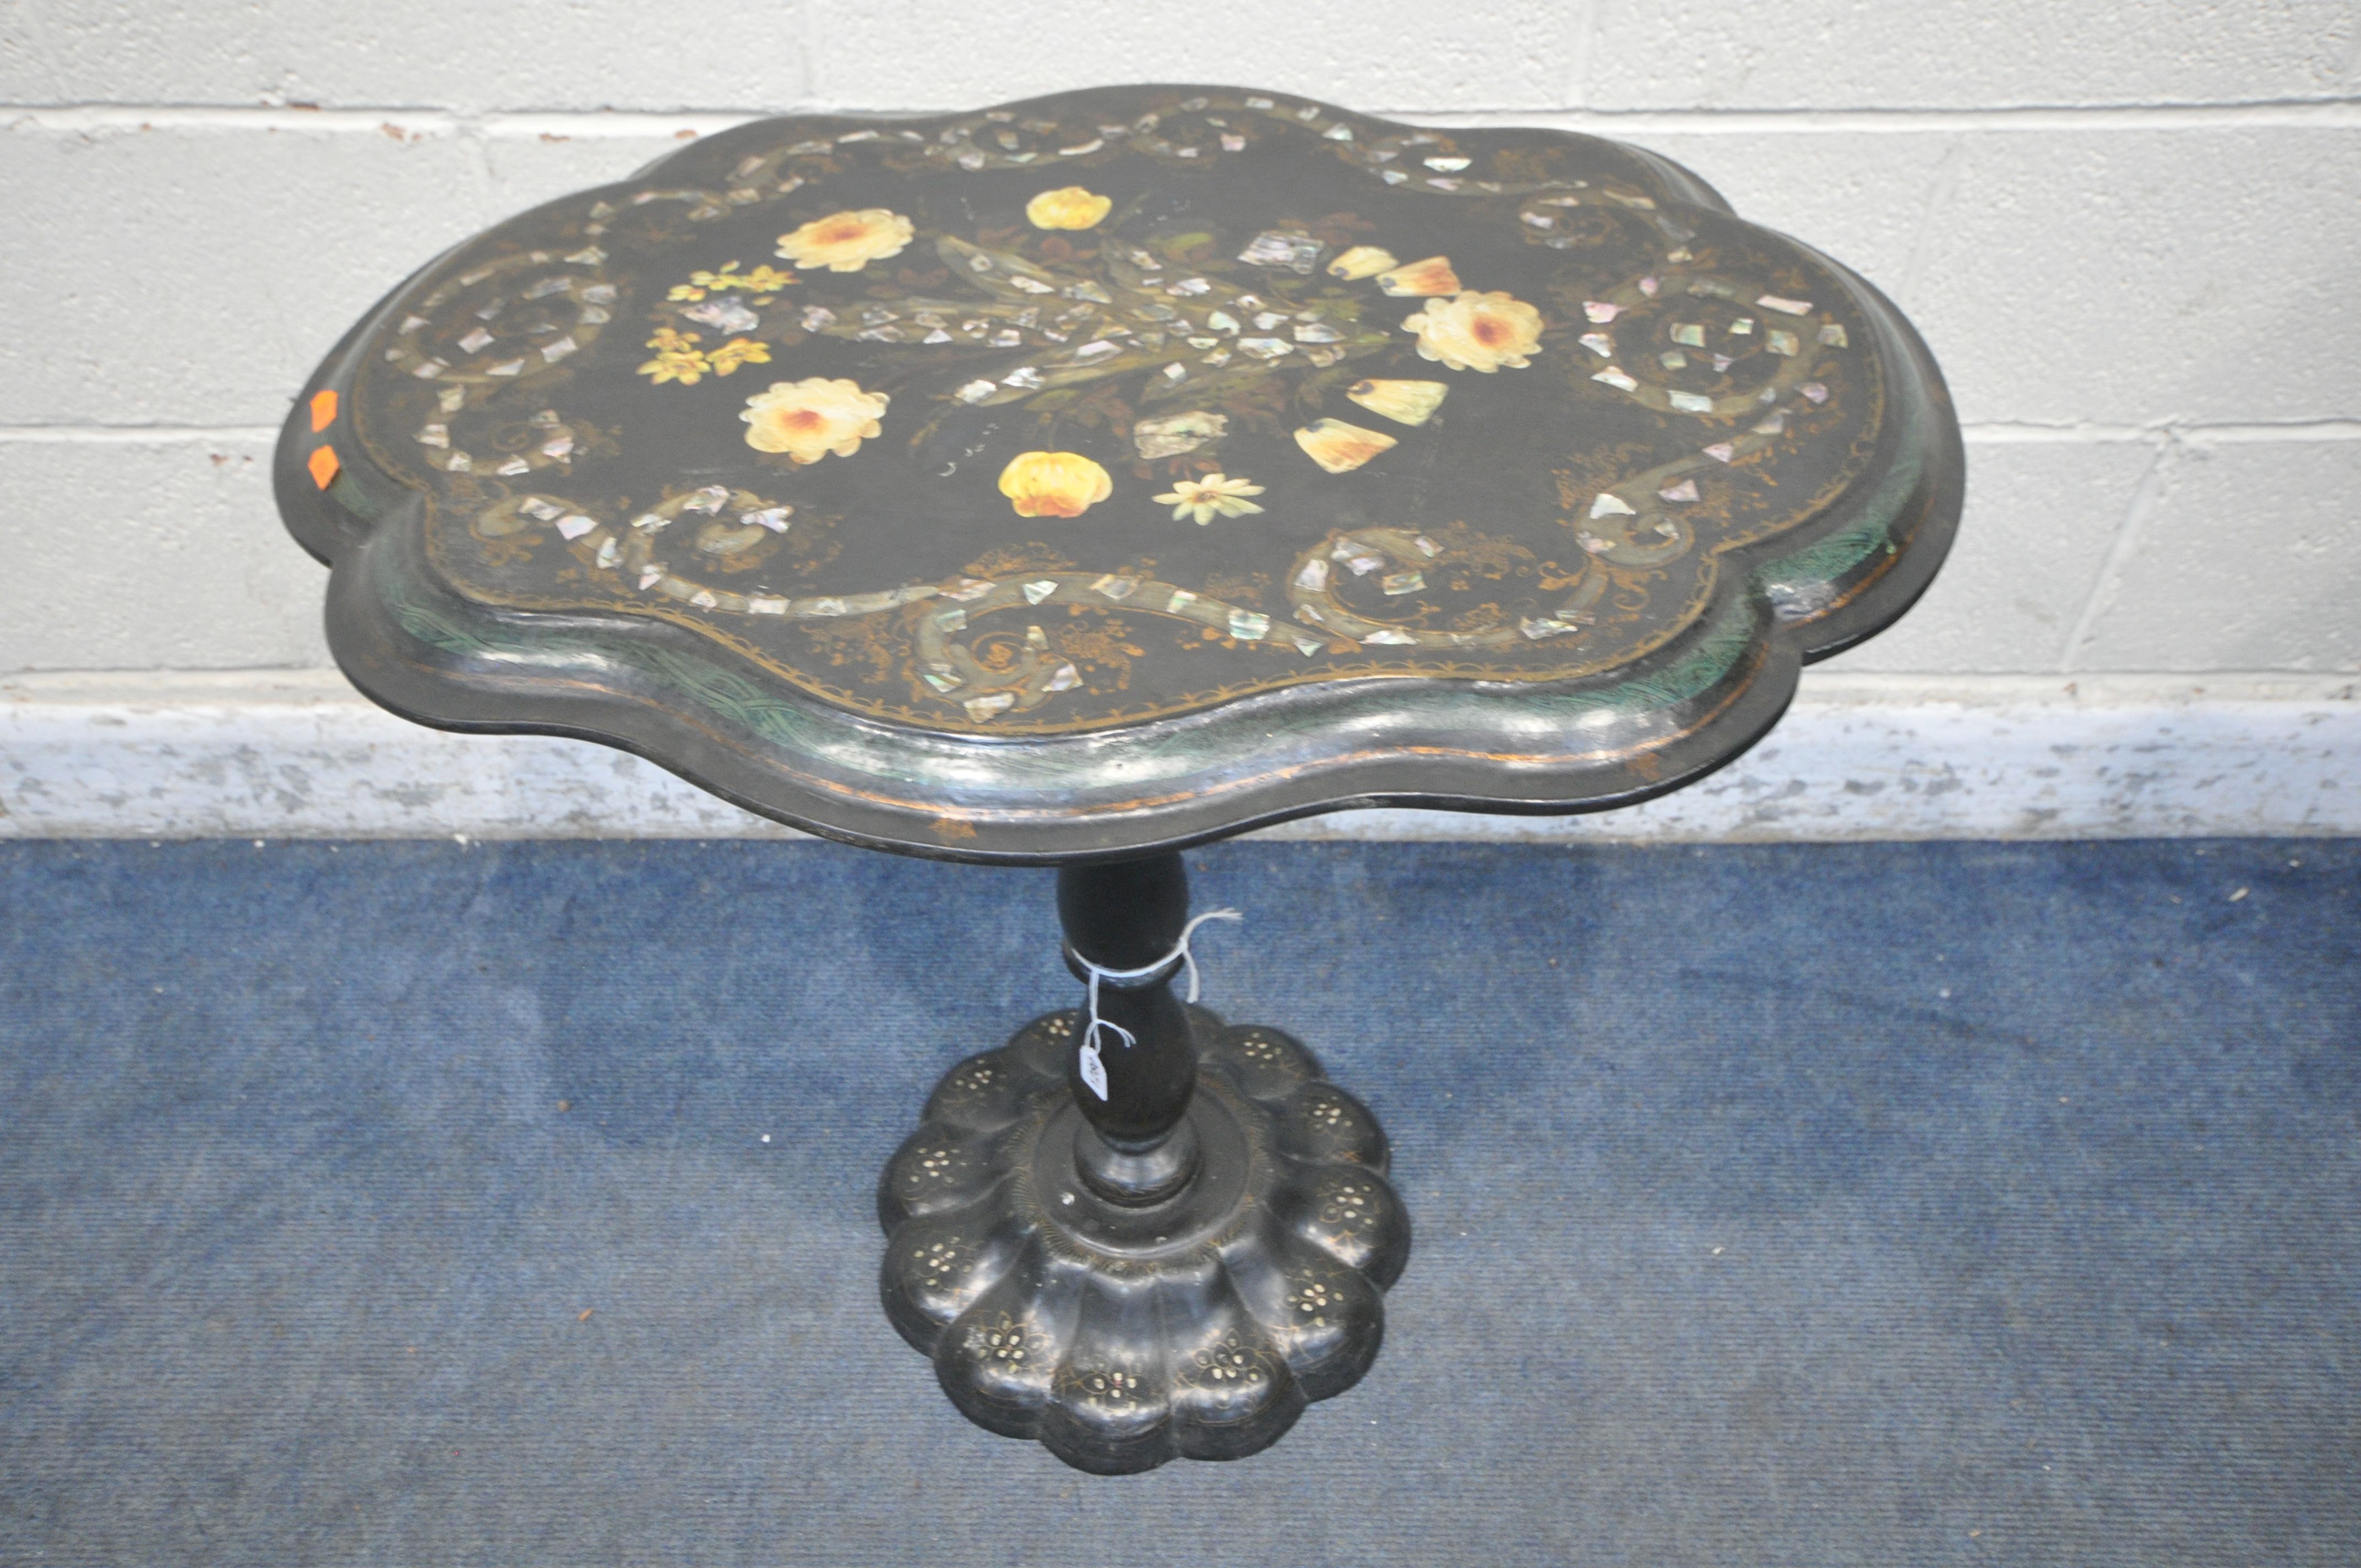 A VICTORIAN EBONISED, PARCEL GILT PAPIER MACHE AND MOTHER OF PEARL TRIPOD TABLE, late 19th